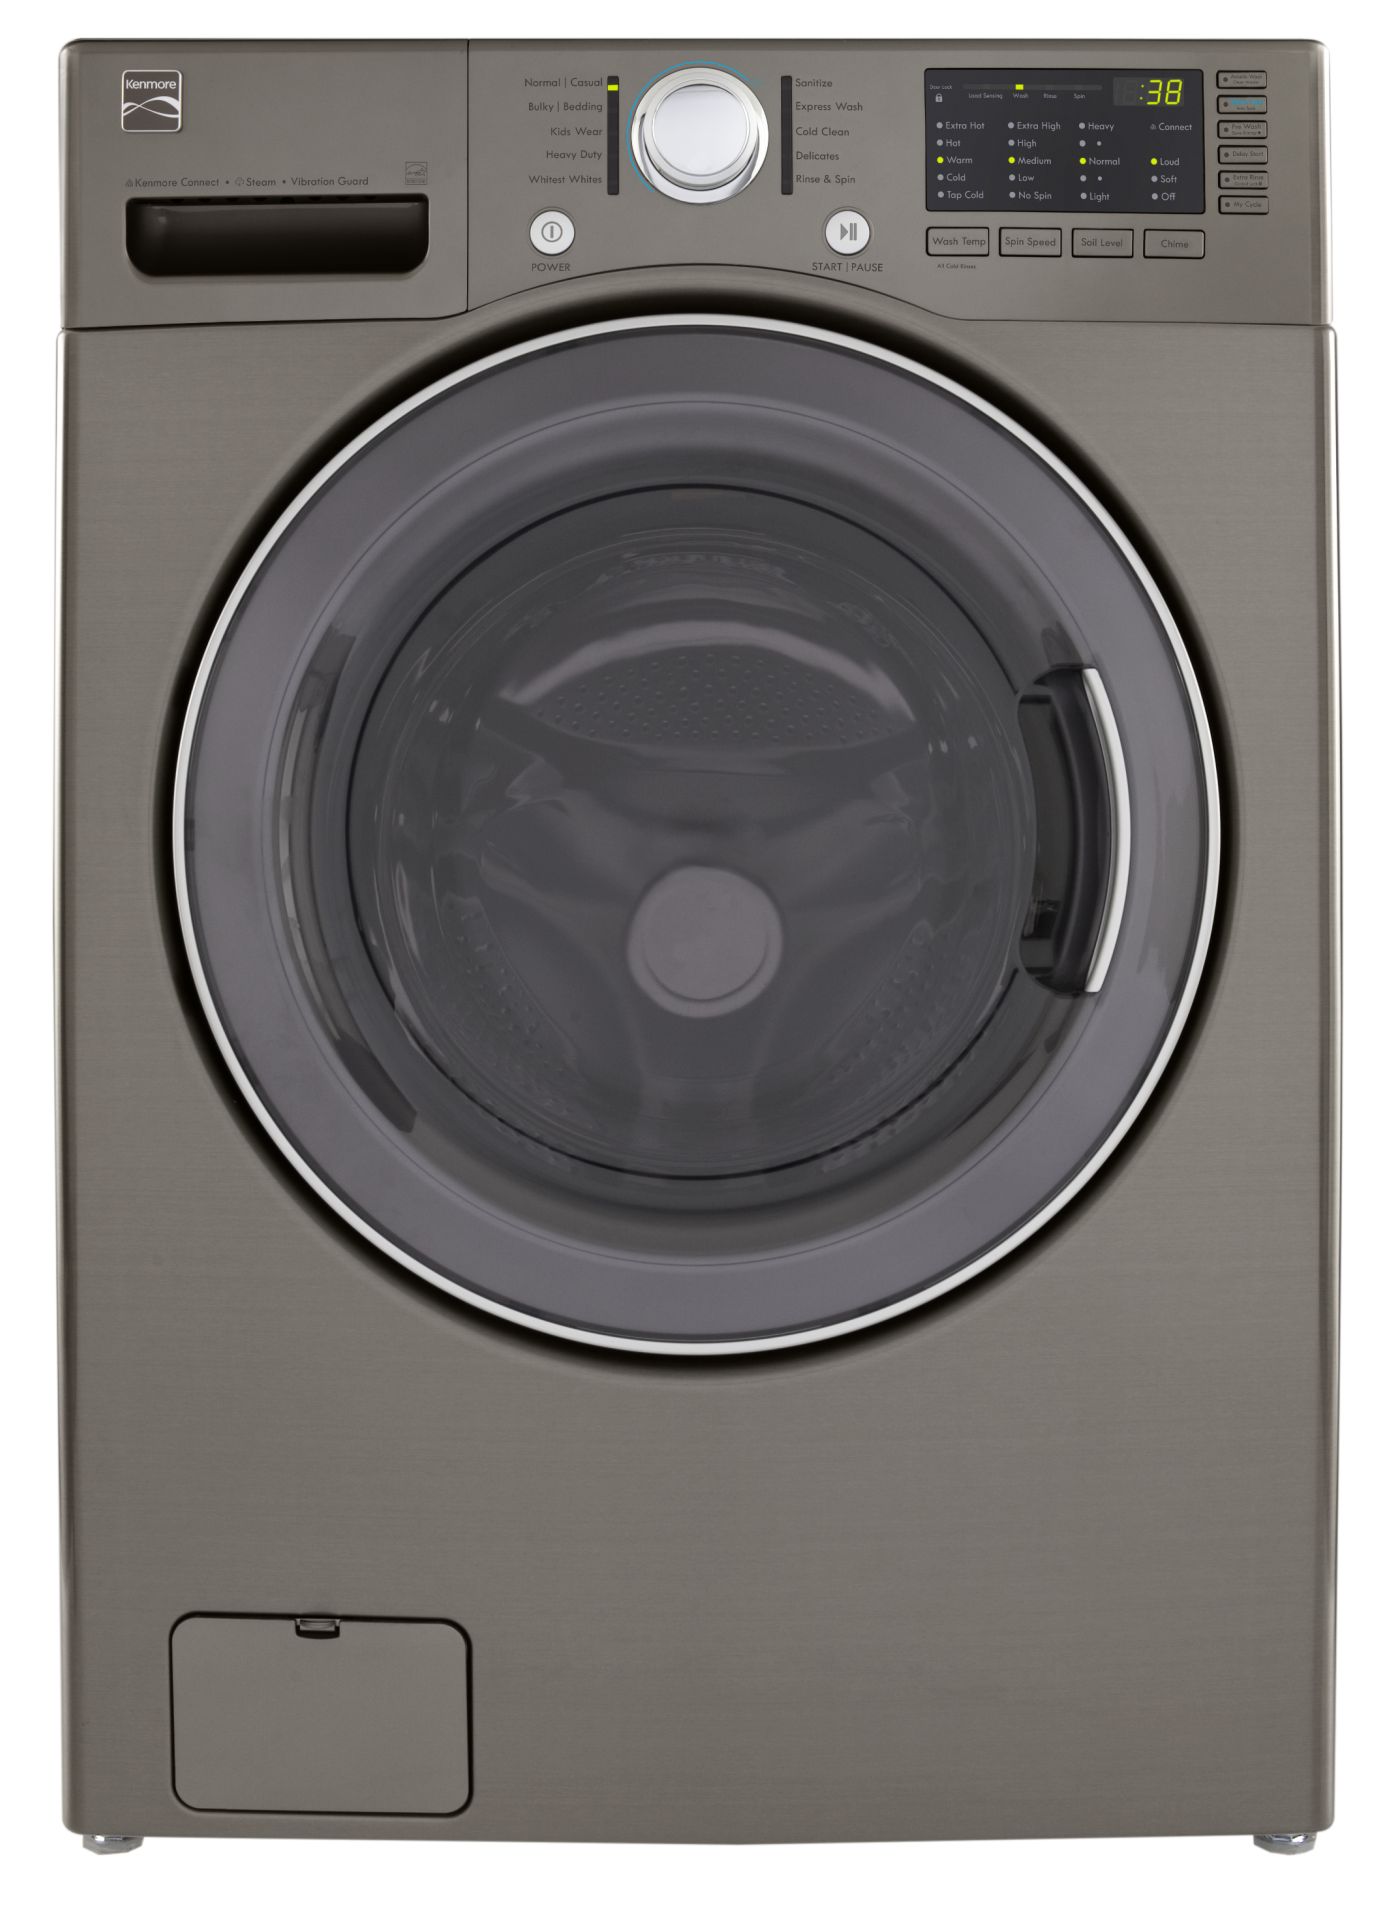 Kenmore 3.7 cu. ft. Steam Front-Load Washer - Metallic Silver